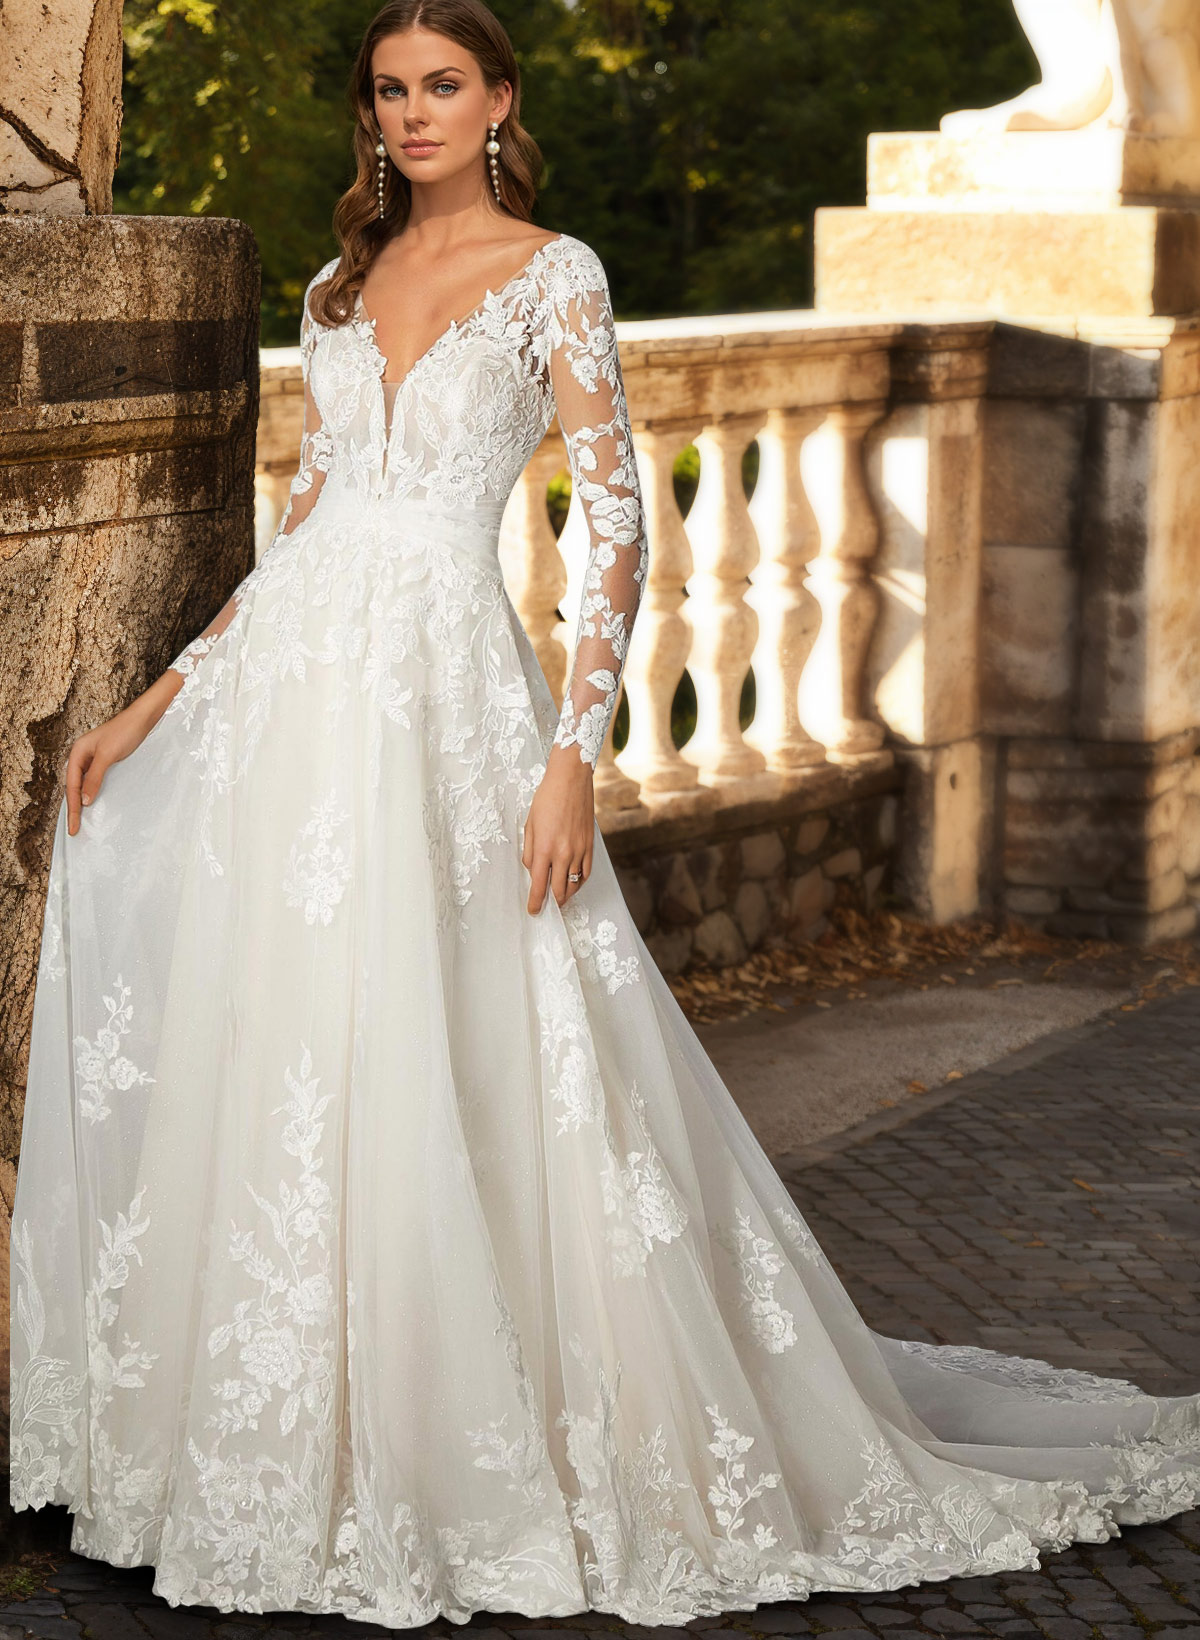 A-Line V-Neck Long Sleeves Tulle Lace Chapel Train Wedding Dresses With Appliques Lace